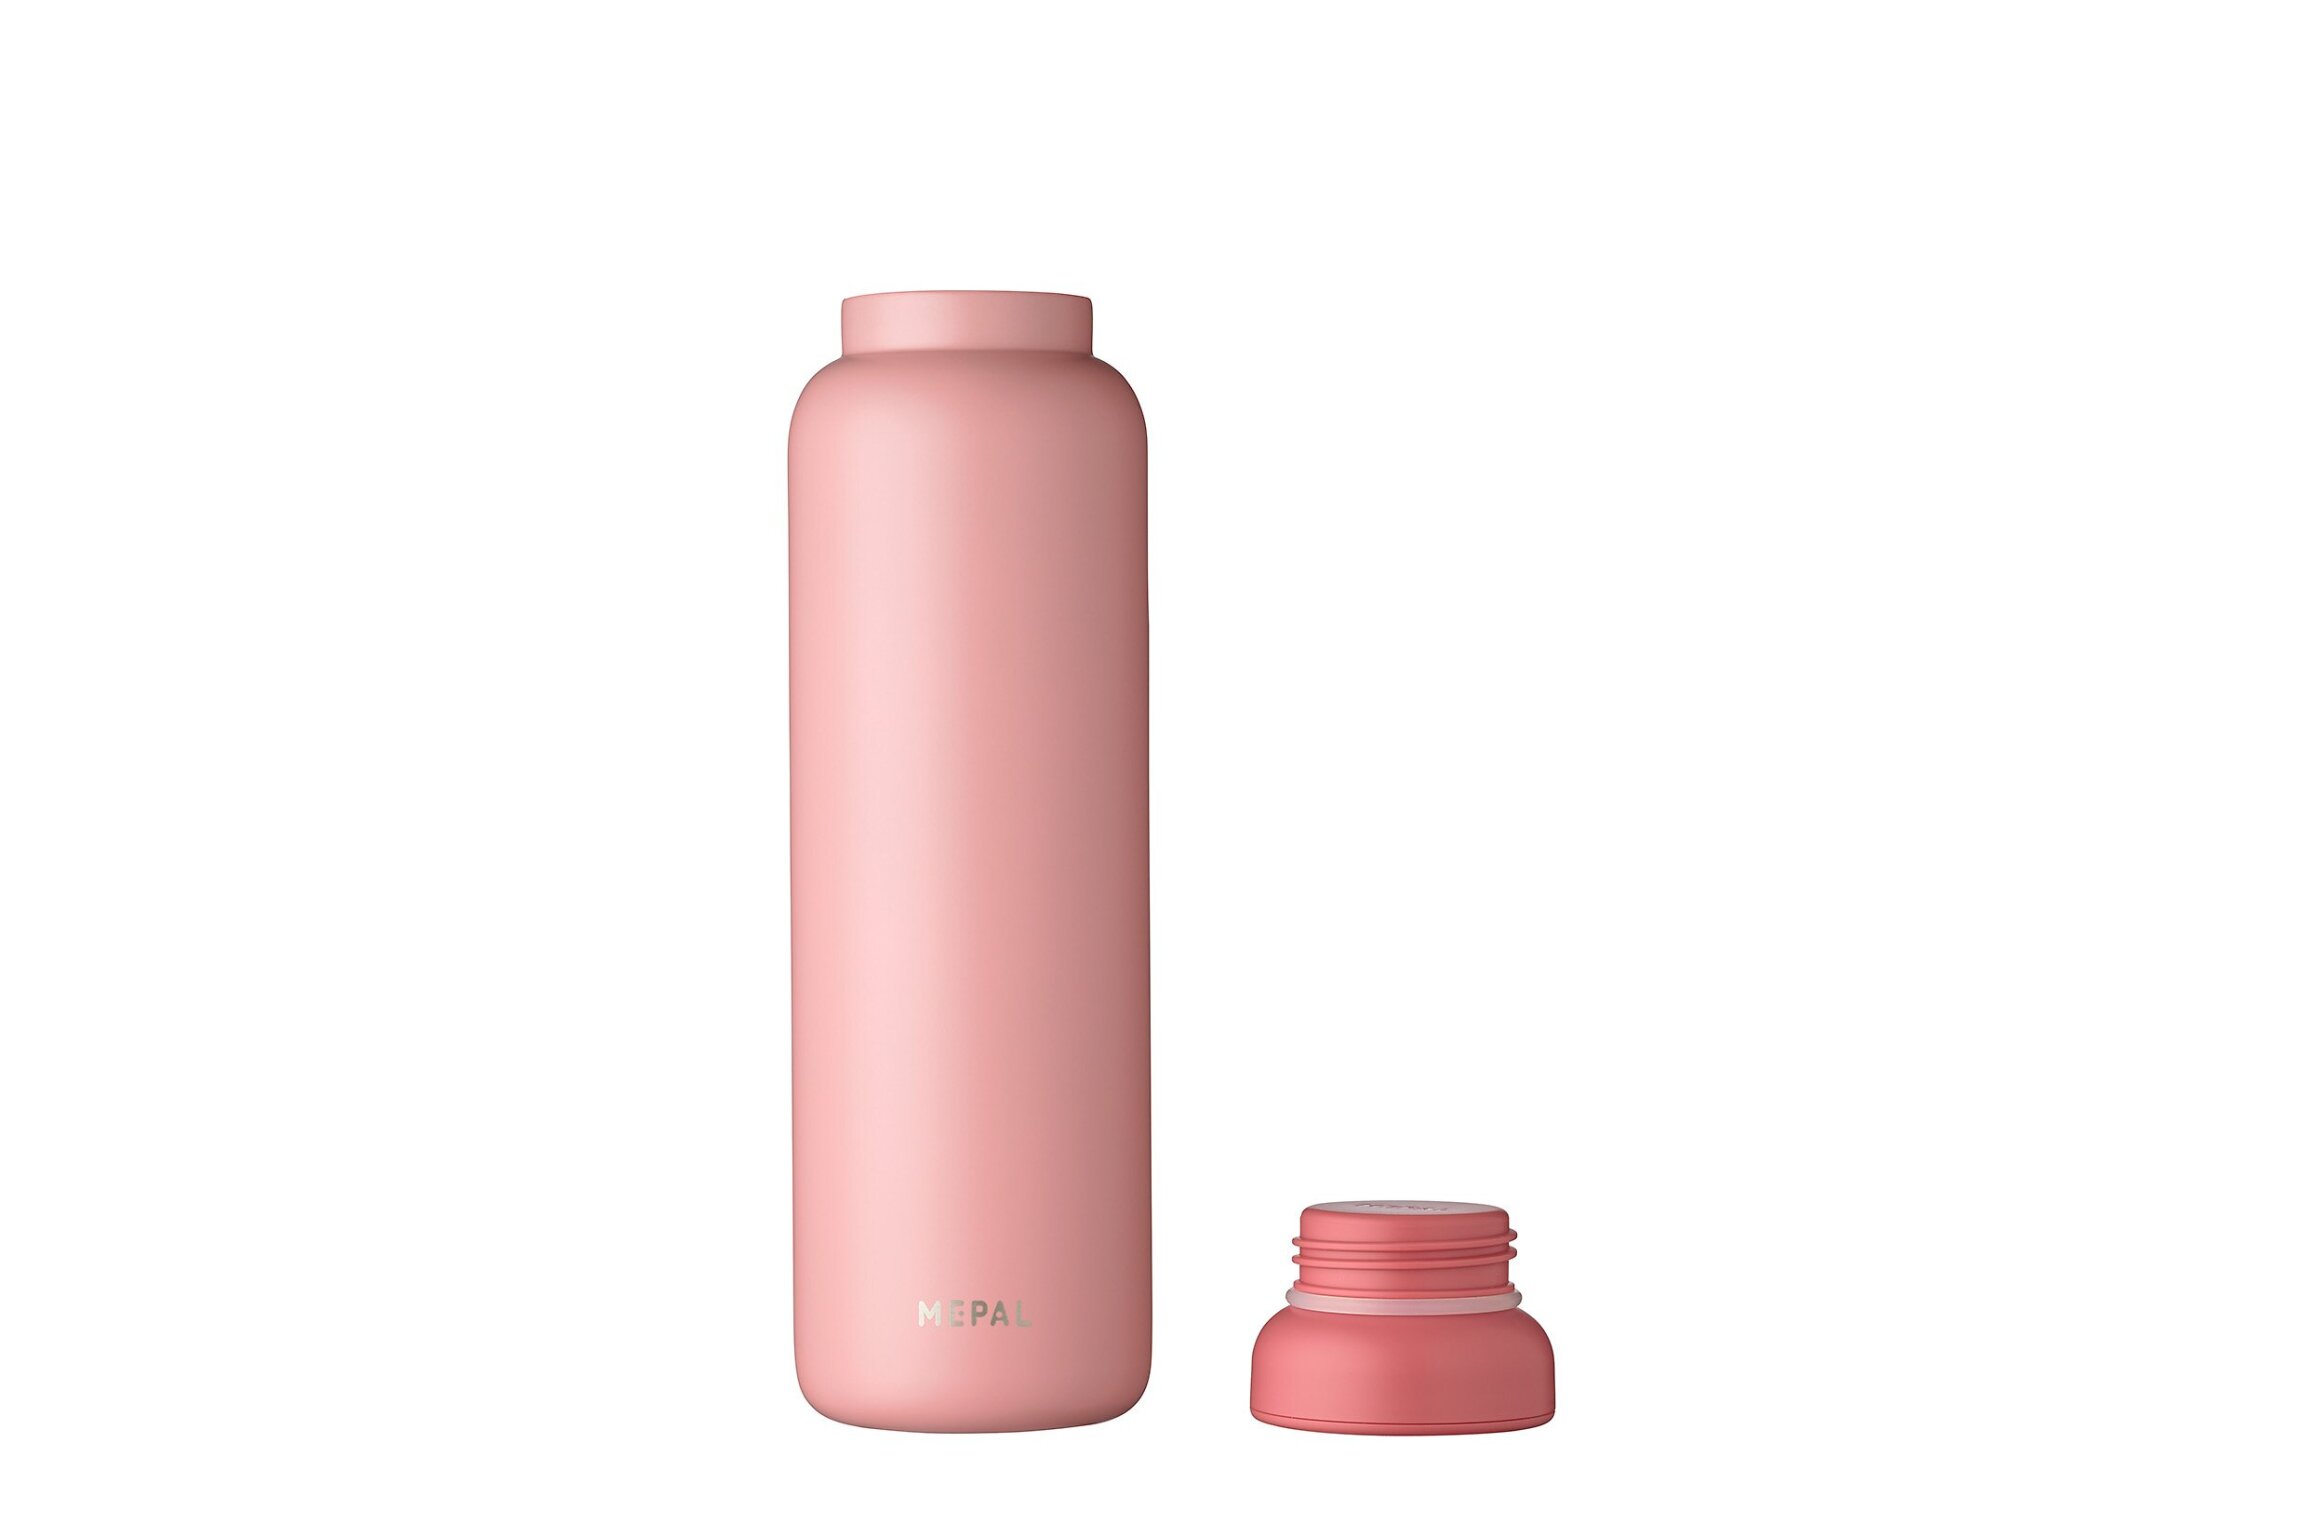 thermoflasche ellipse 900 ml - nordic pink